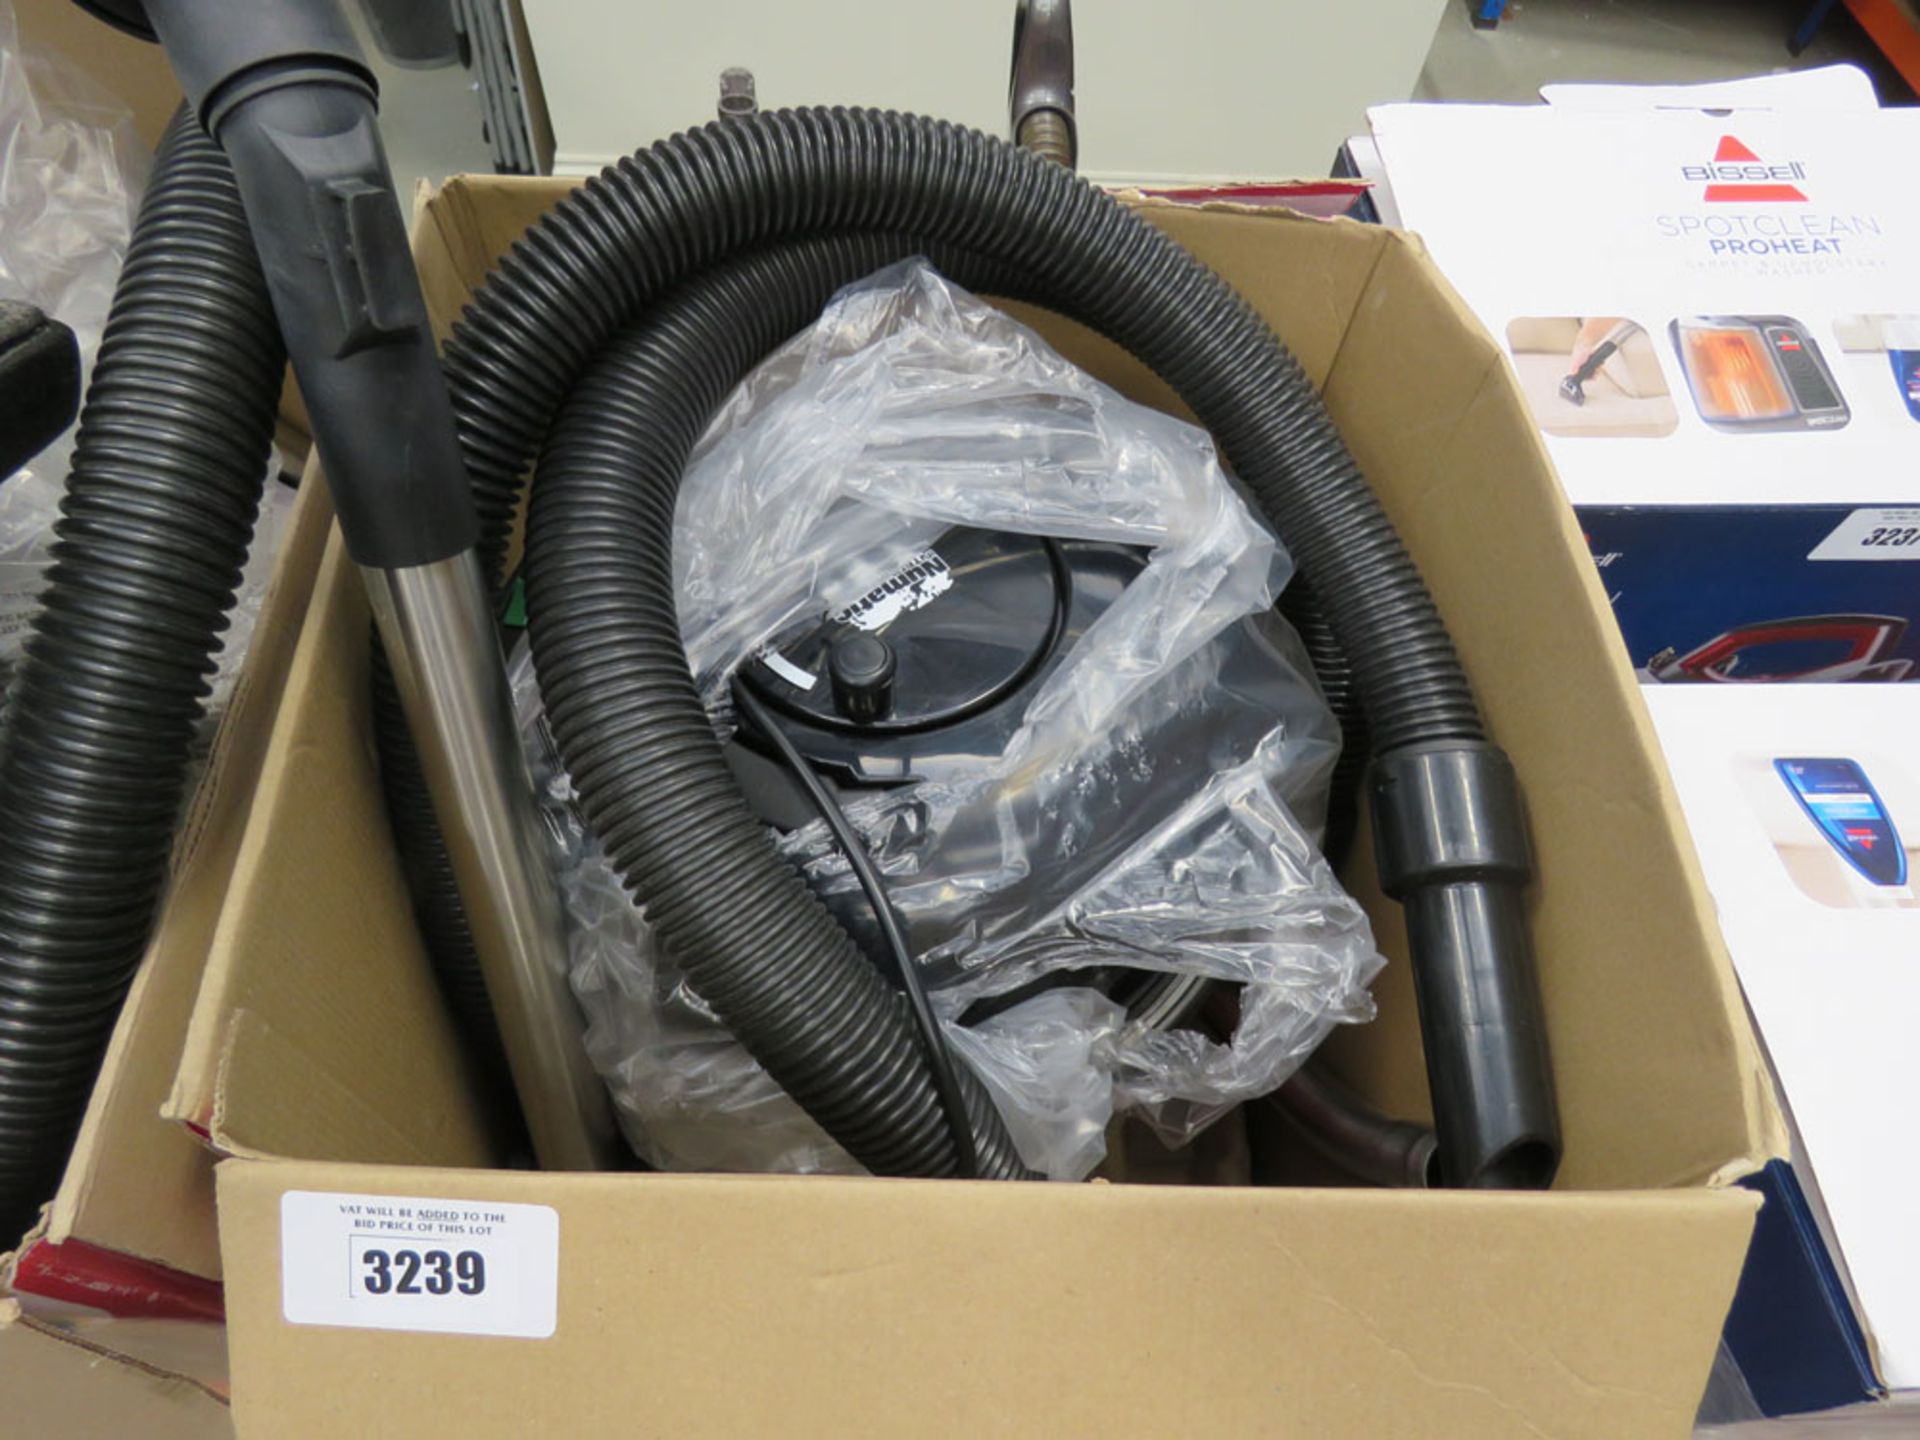 Henry Micro vacuum cleaner with box, pipe and pole